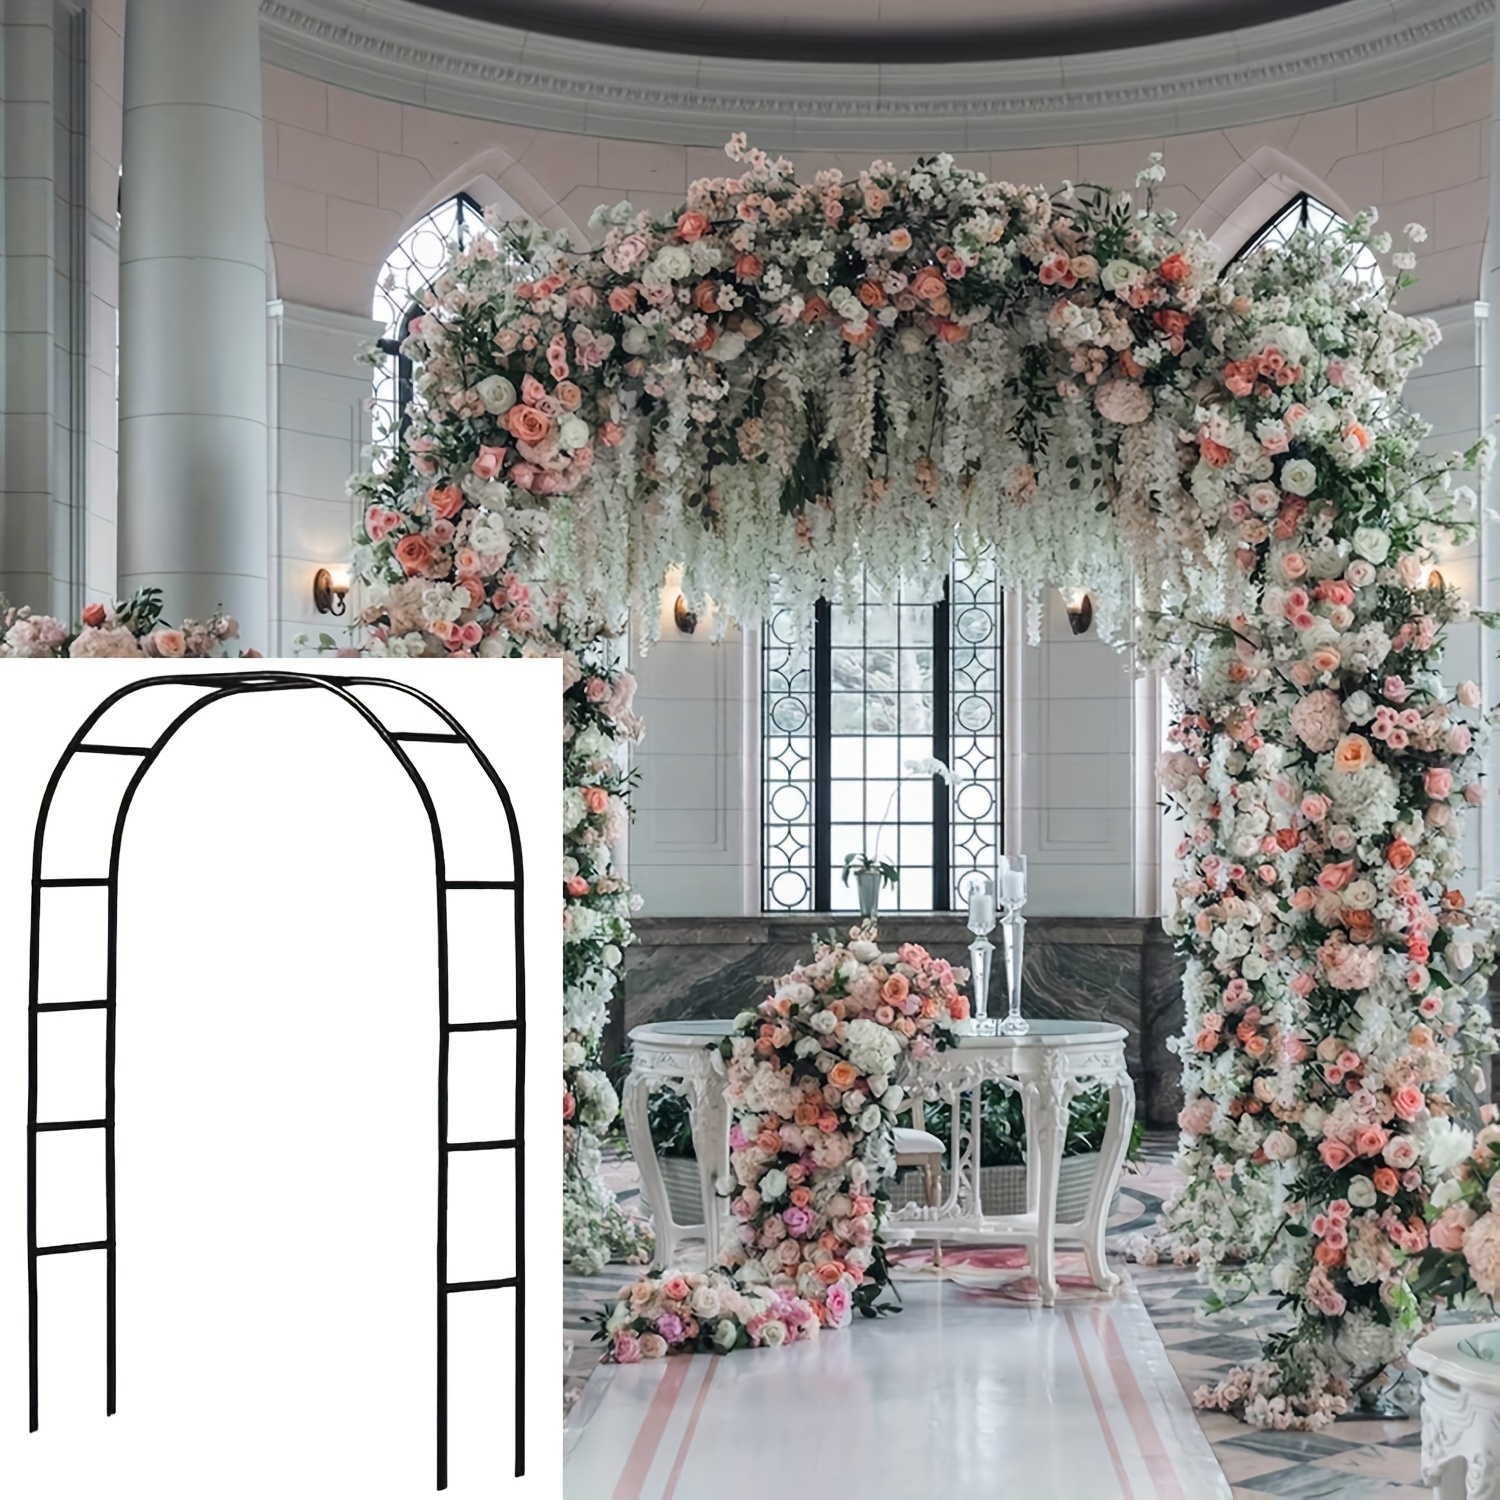 

Thickened Rustproof Garden Arch, Wedding Arch- 4.6 * 7.8 Or 6.4 * 7.5ft, Easy To Assemble, Long Lasting And Durable, Metal Arch For Garden Arbor Trellis & Climbing Plant